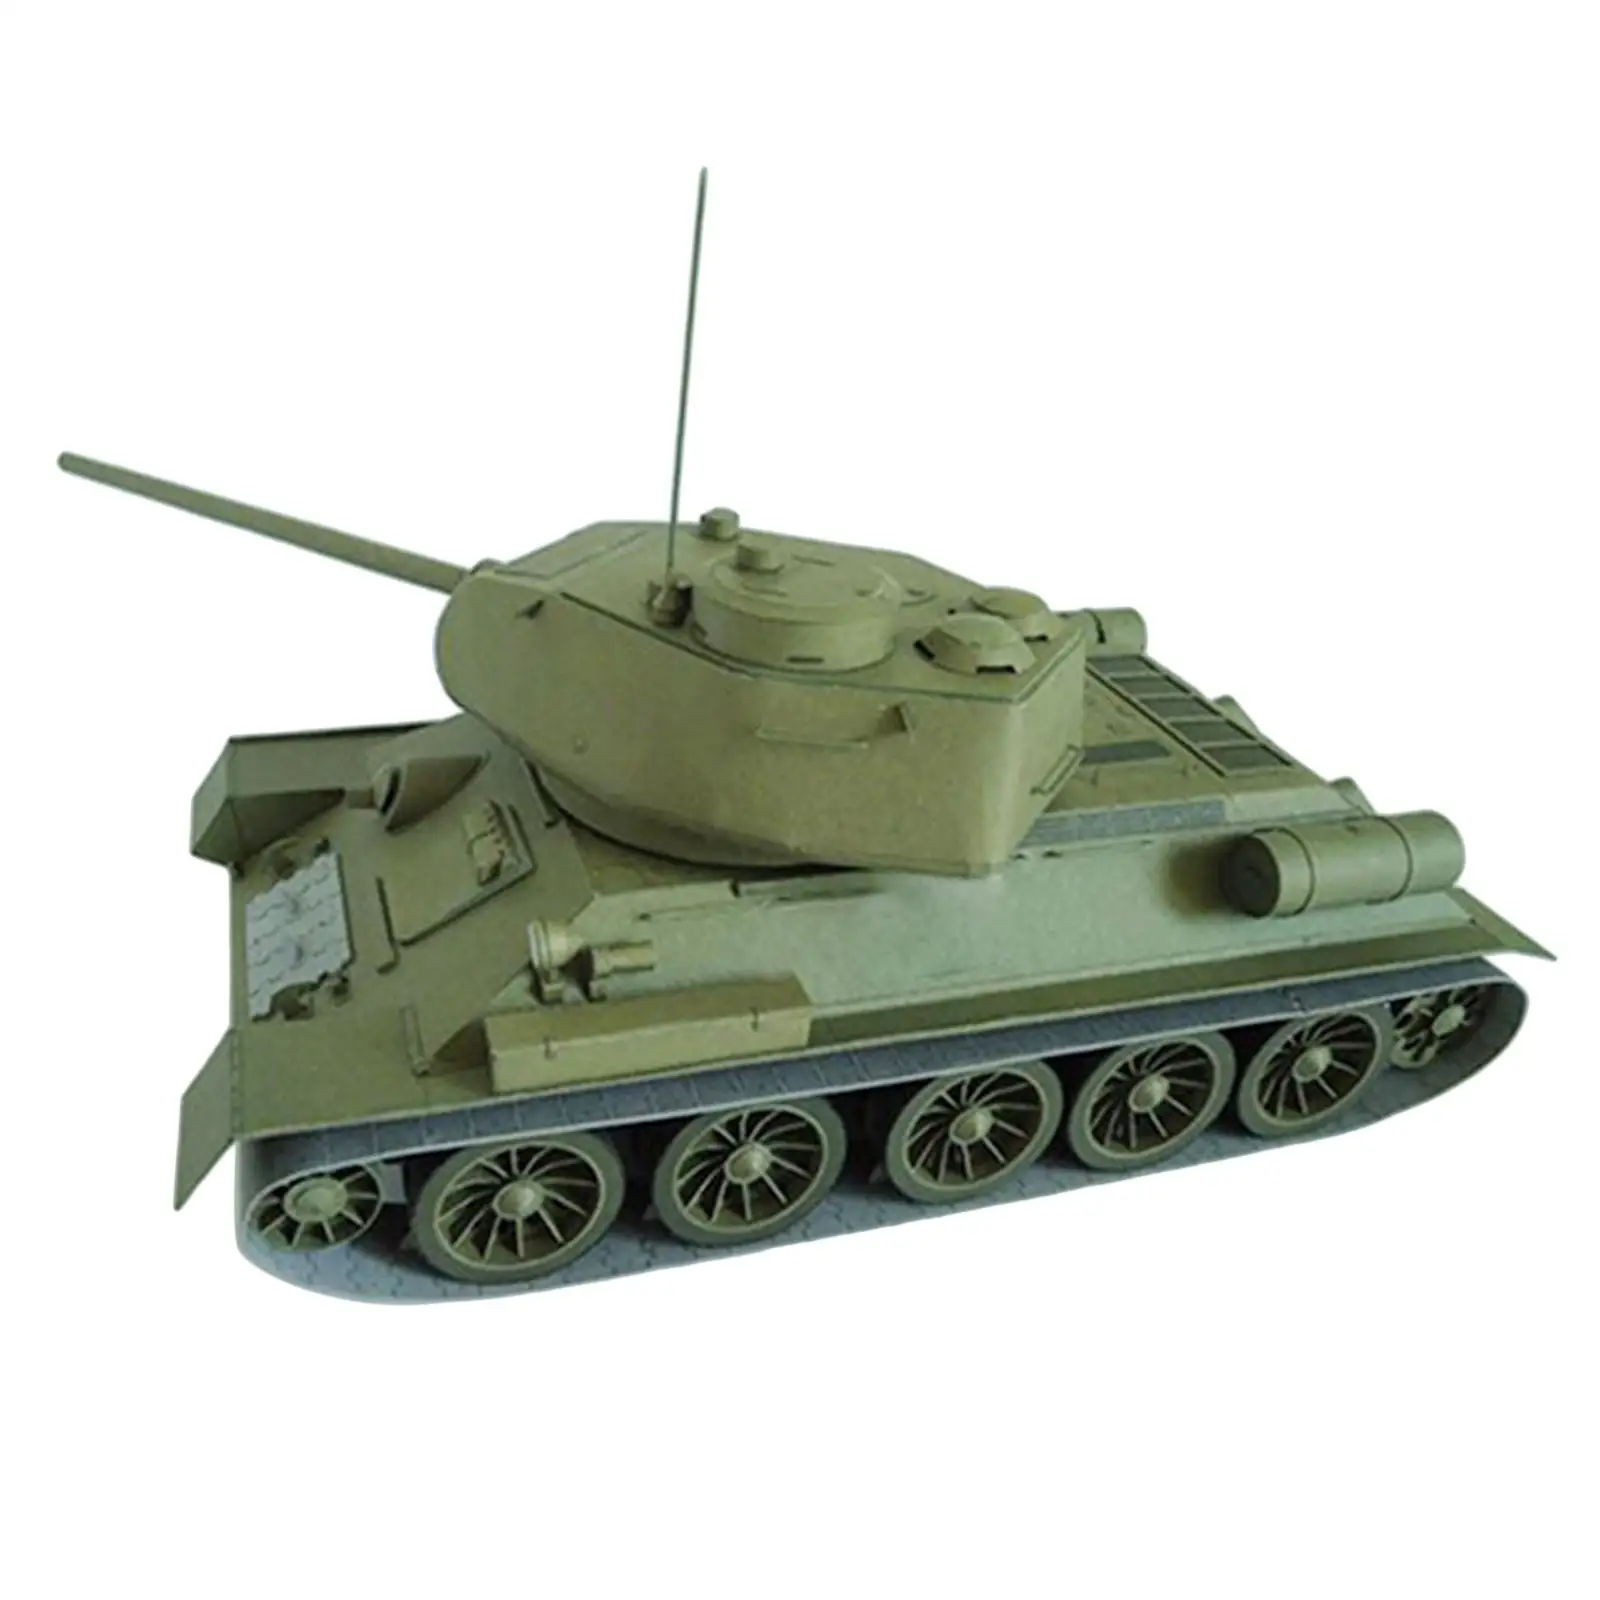 

1/25 Tank Model Collectables 3D Paper Puzzle Tabletop Decor Building Kits Cardboard Educational Toys for Boys Adults Kids